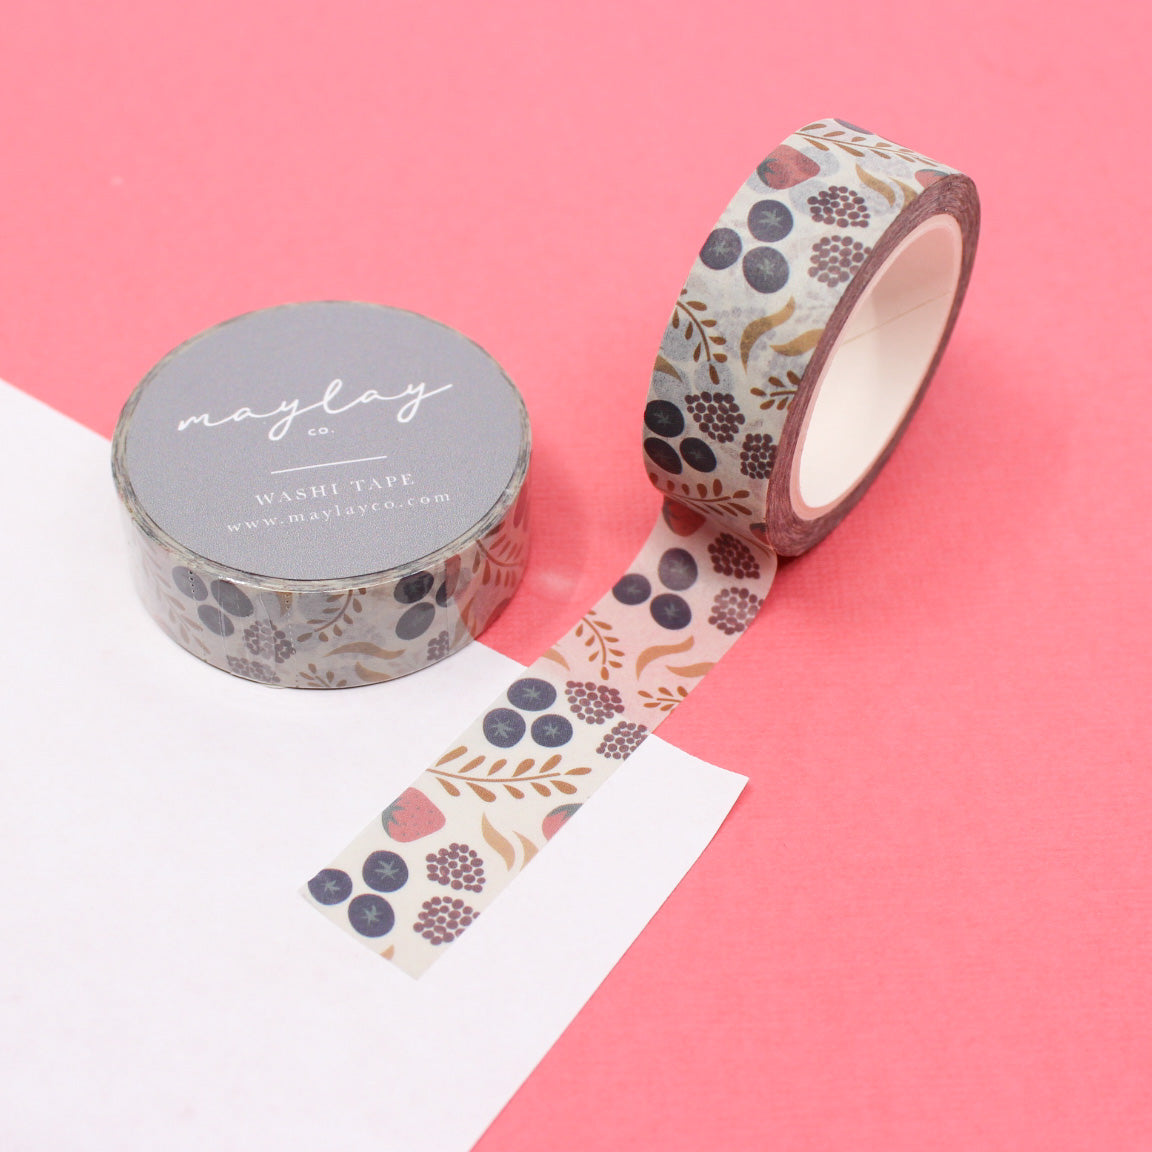 Add a subtle burst of fruity flavor to your crafts with our Muted Colors Fruity Washi Tape, featuring a soft and pastel-colored fruit pattern. Ideal for adding a touch of sweetness to your projects. This tape is designed by Maylay co and sold at BBB Supplies Craft Shop.